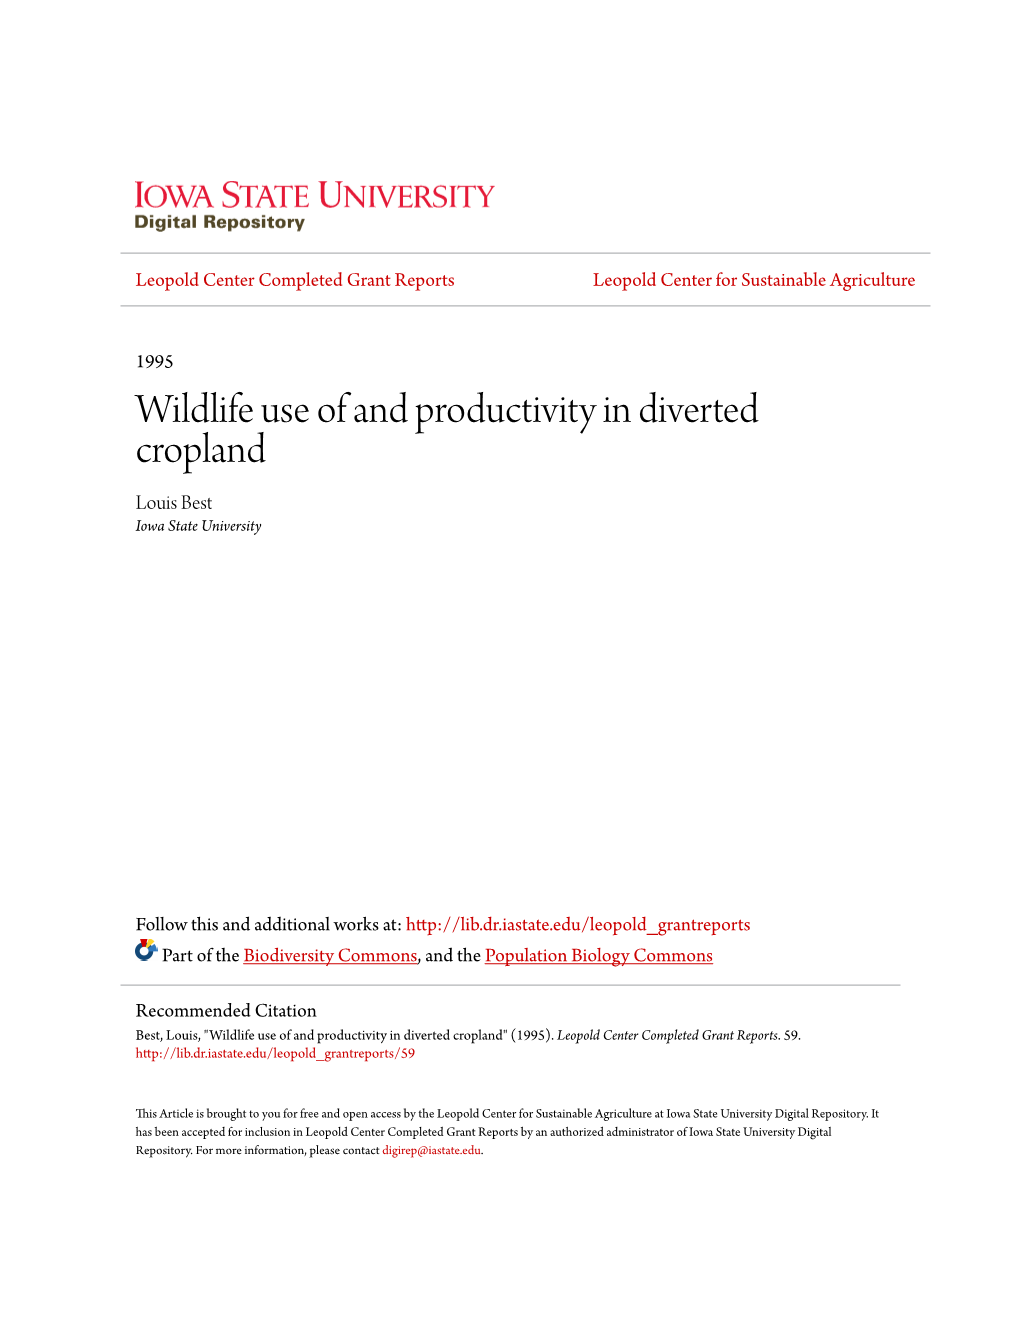 Wildlife Use of and Productivity in Diverted Cropland Louis Best Iowa State University